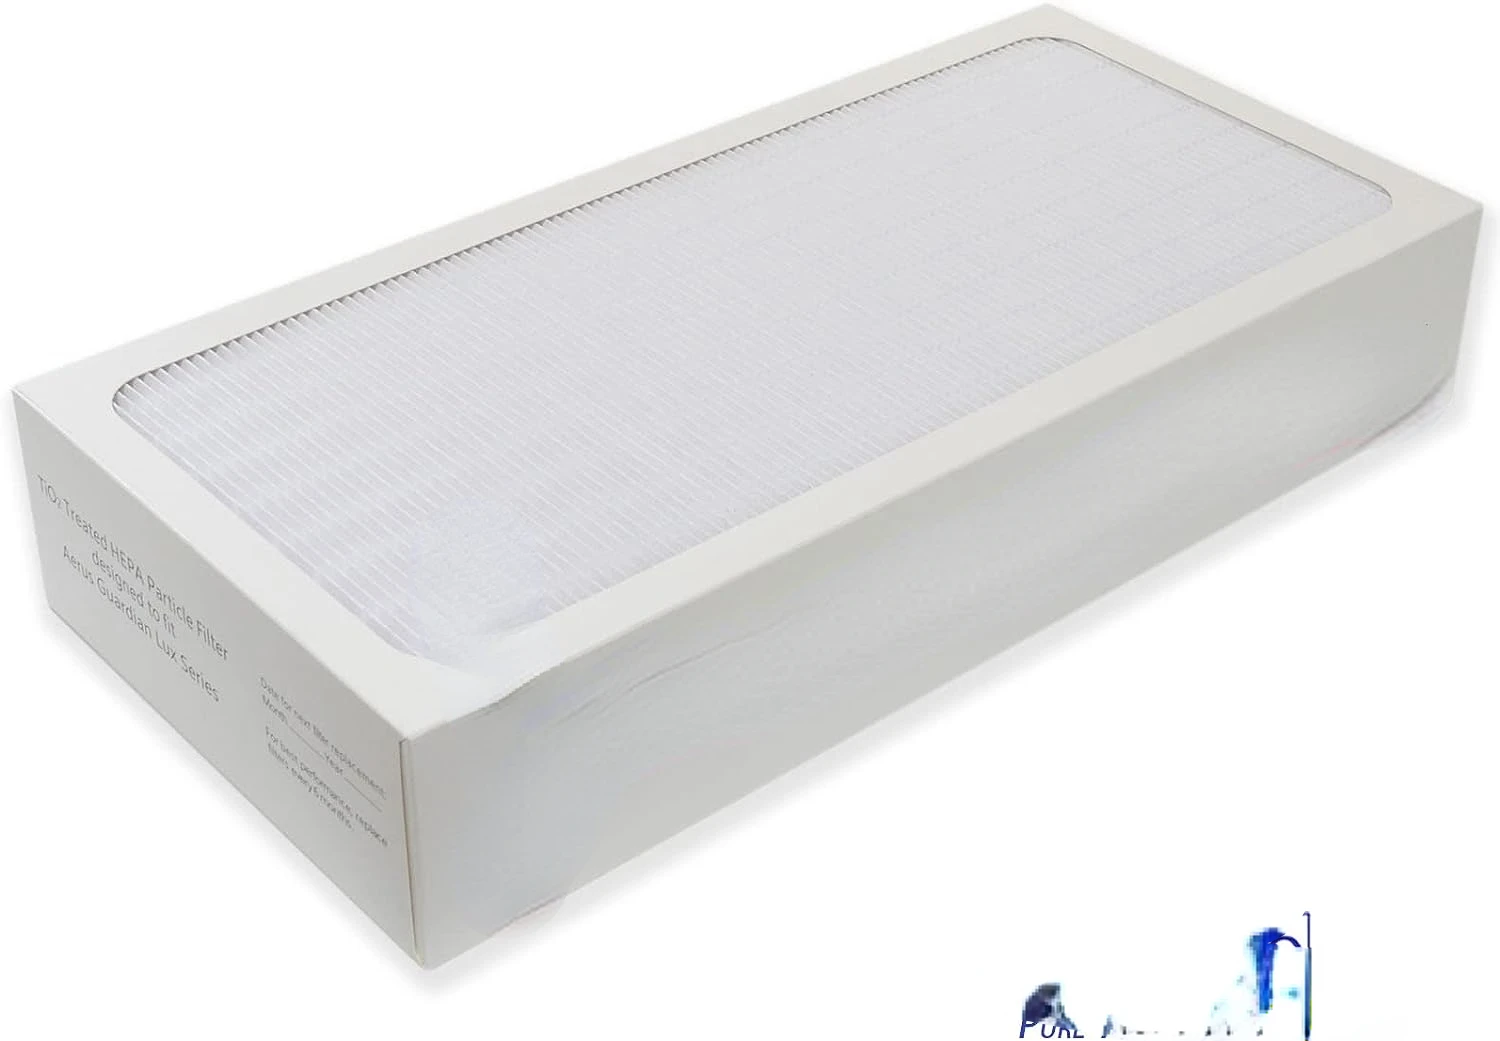 

Replacement True HEPA Filter Compatible with Electrolux Aerus Tio2 Air Purifier, H13 4-Stage Filtration High-efficiency Activate